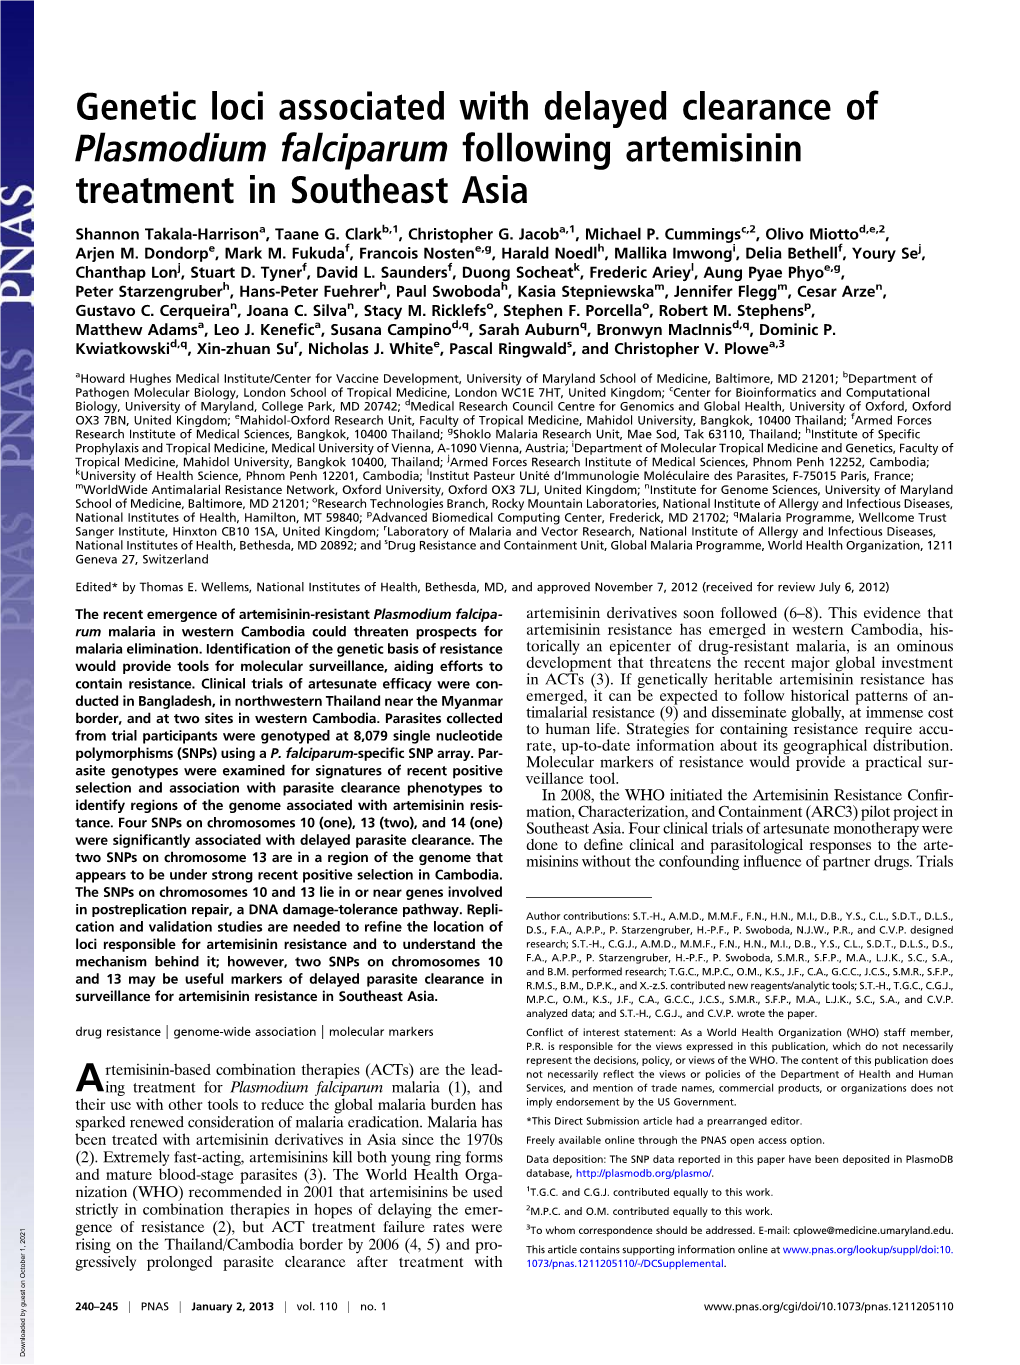 Genetic Loci Associated with Delayed Clearance of Plasmodium Falciparum Following Artemisinin Treatment in Southeast Asia